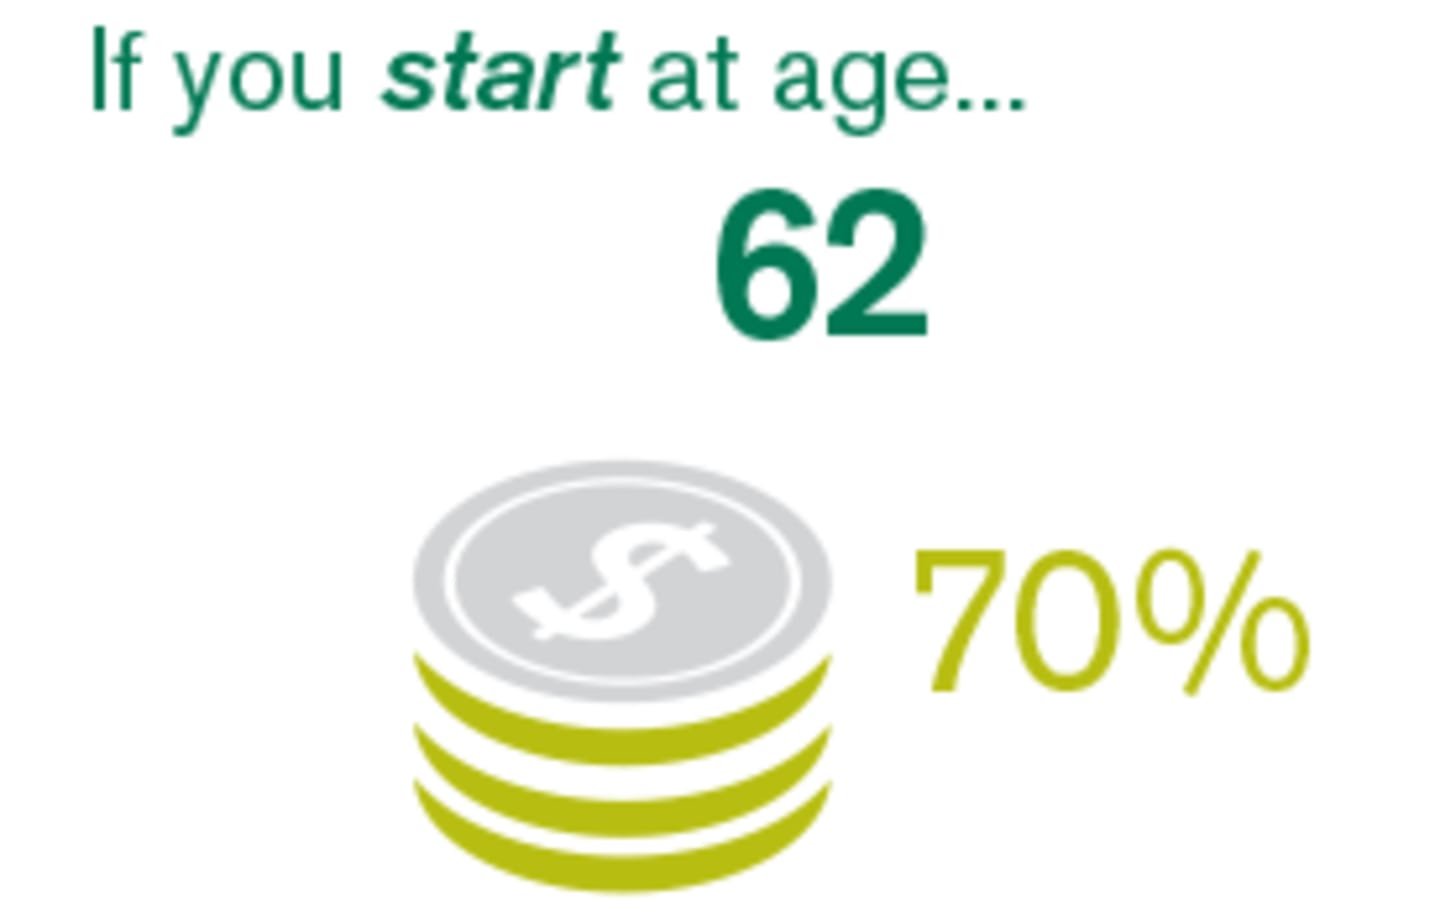 Starting at age 62, receive 70%